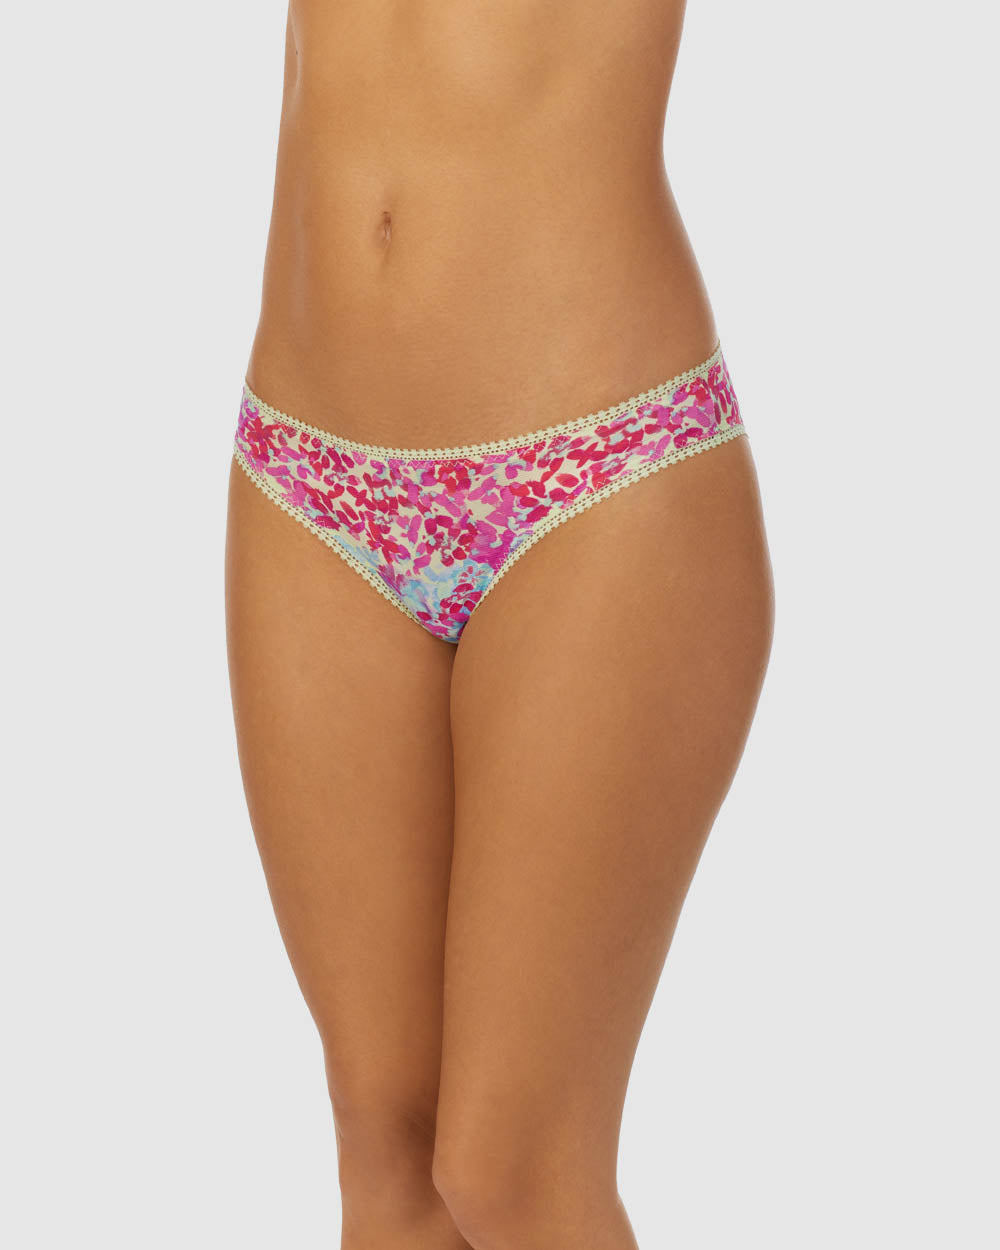 A lady wearing bright blooms Triple Mesh Hip G Underwear thong